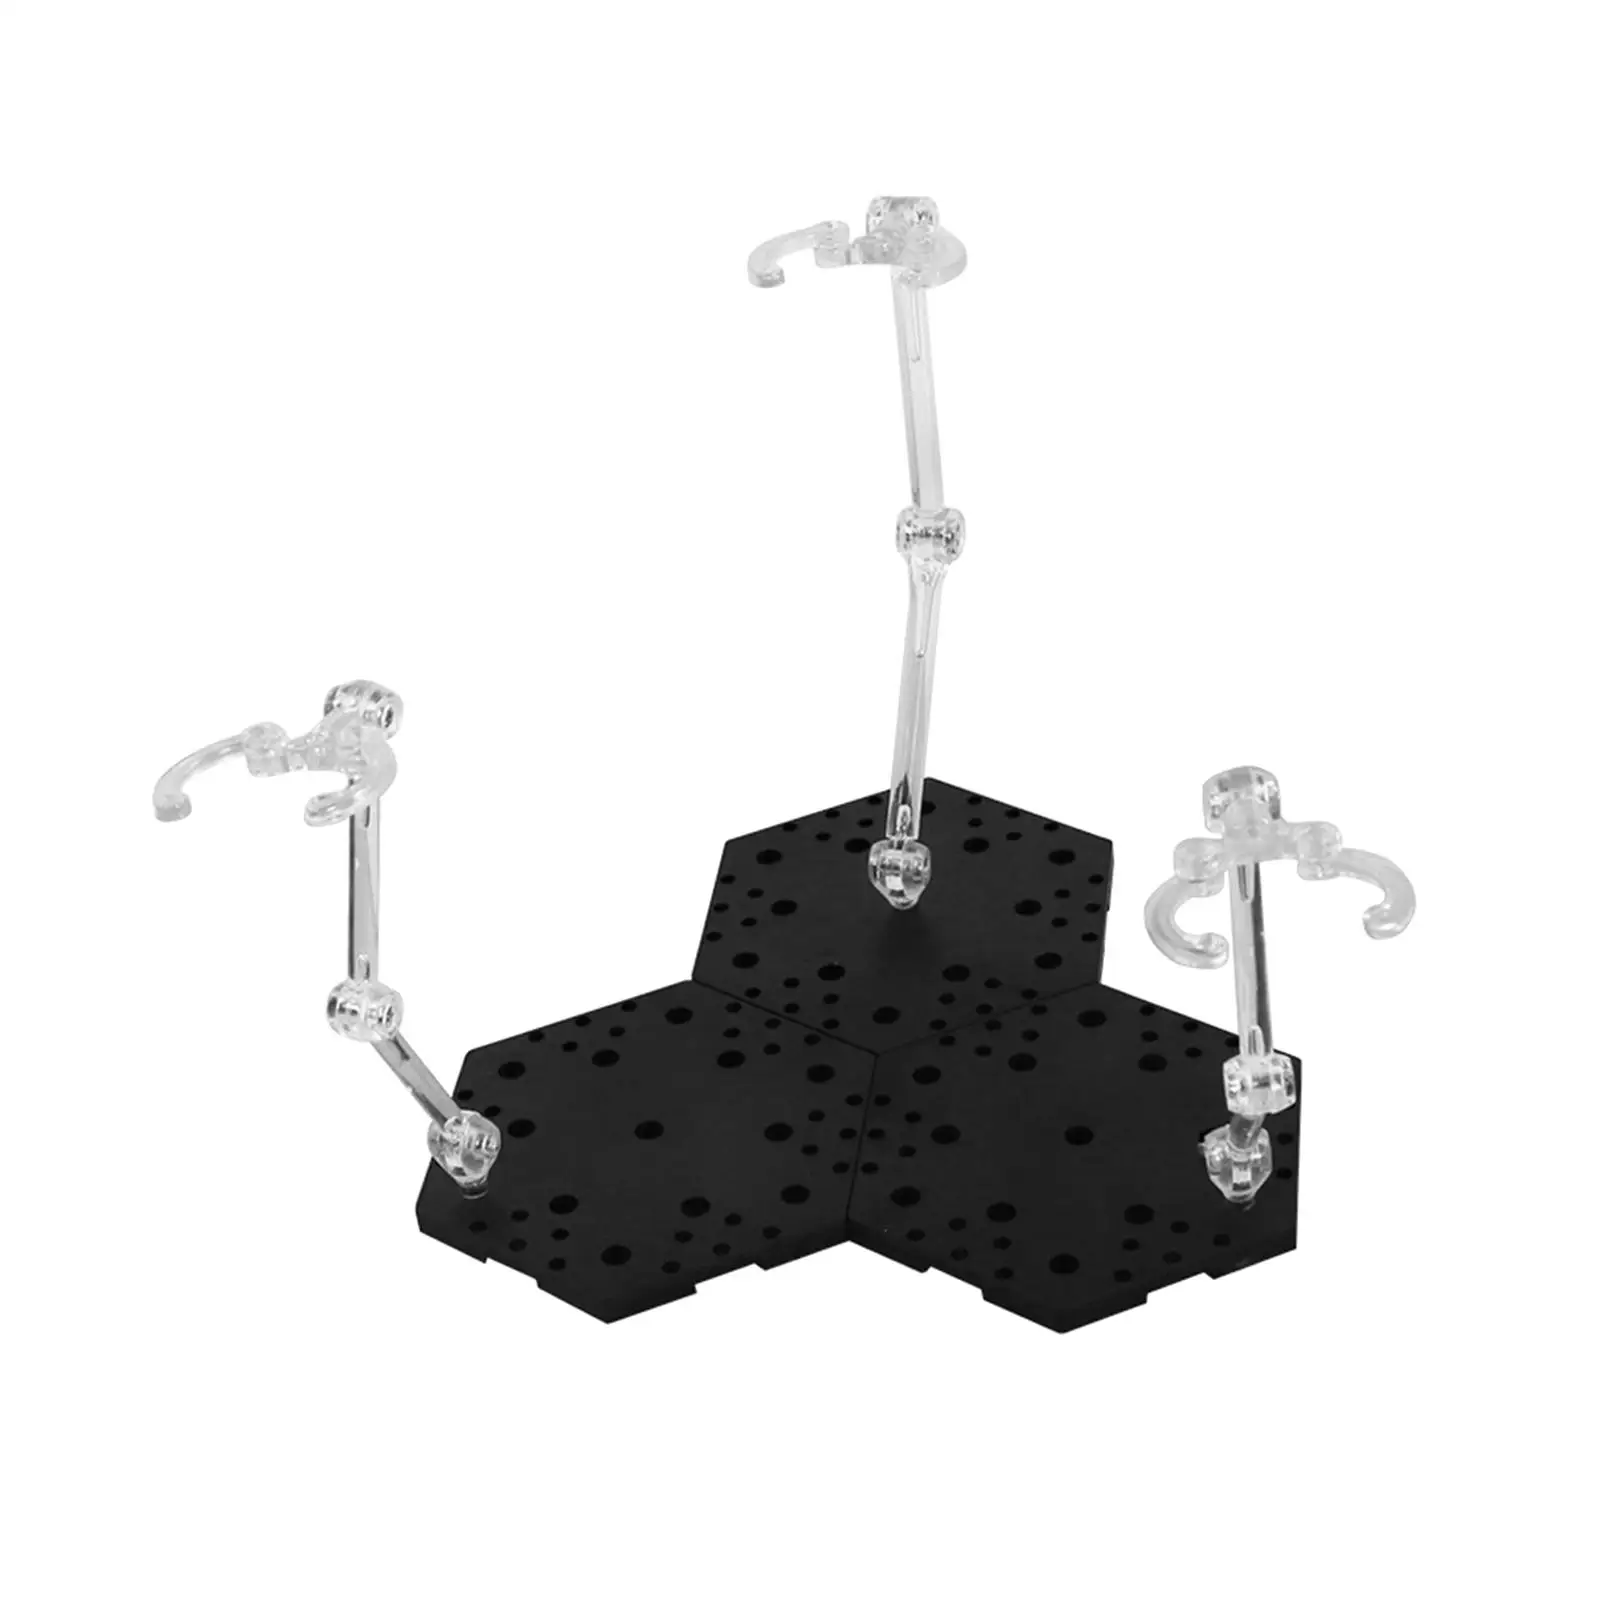 Sturdy Figure Display Base Holder Stand Bracket for 1/144 Action Figures Toys Accs